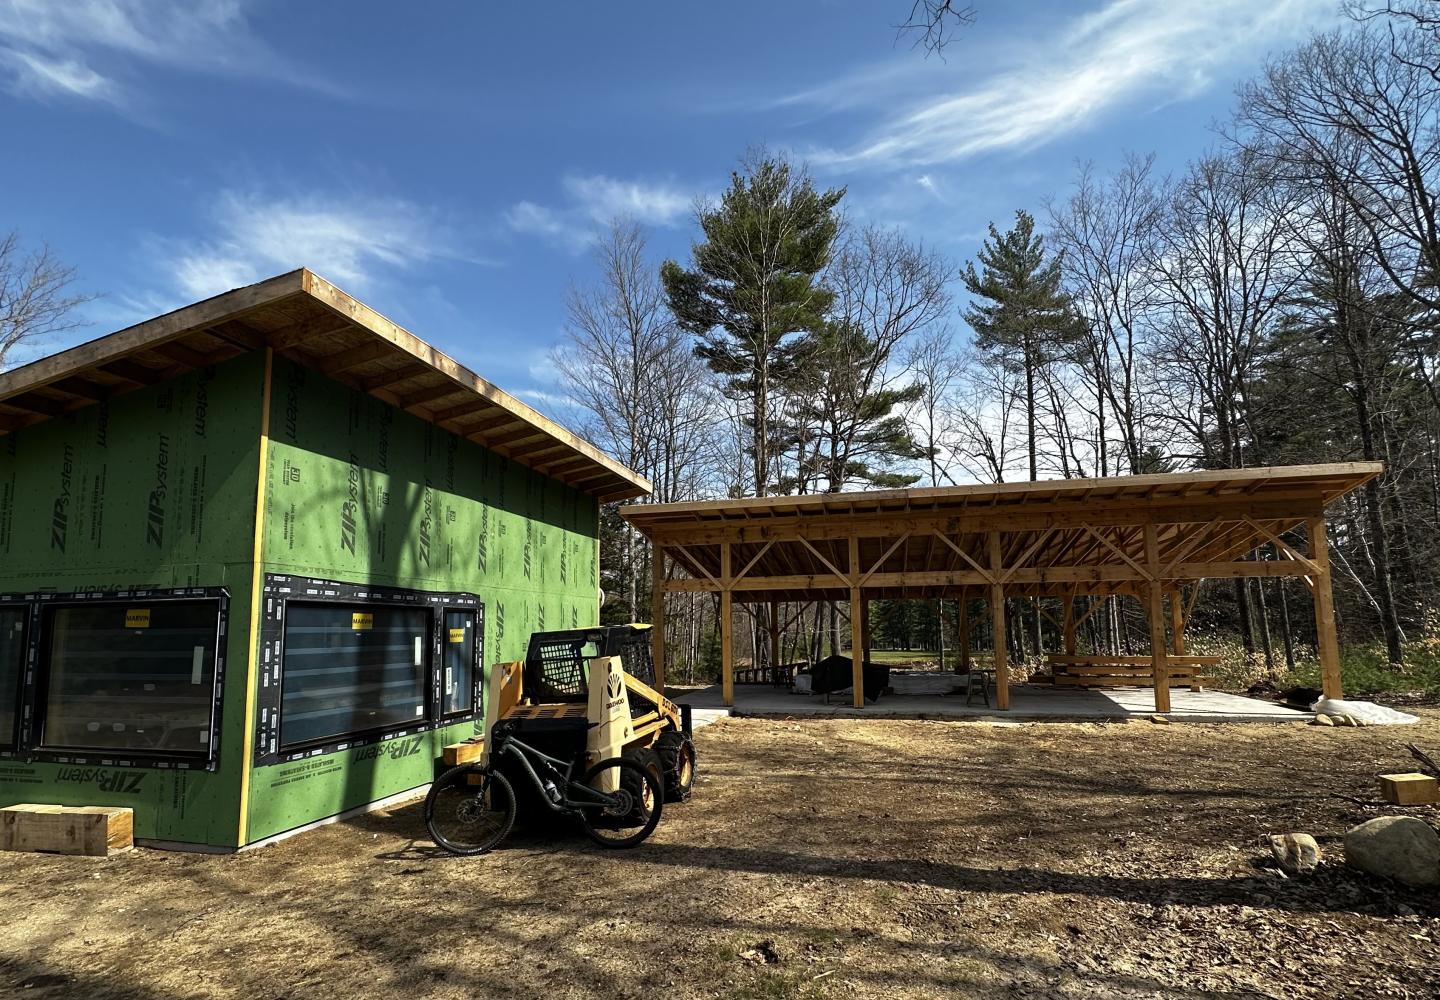 Elizabethtown is constructing a pavilion and welcome center at the Cobble Hill trailhead.